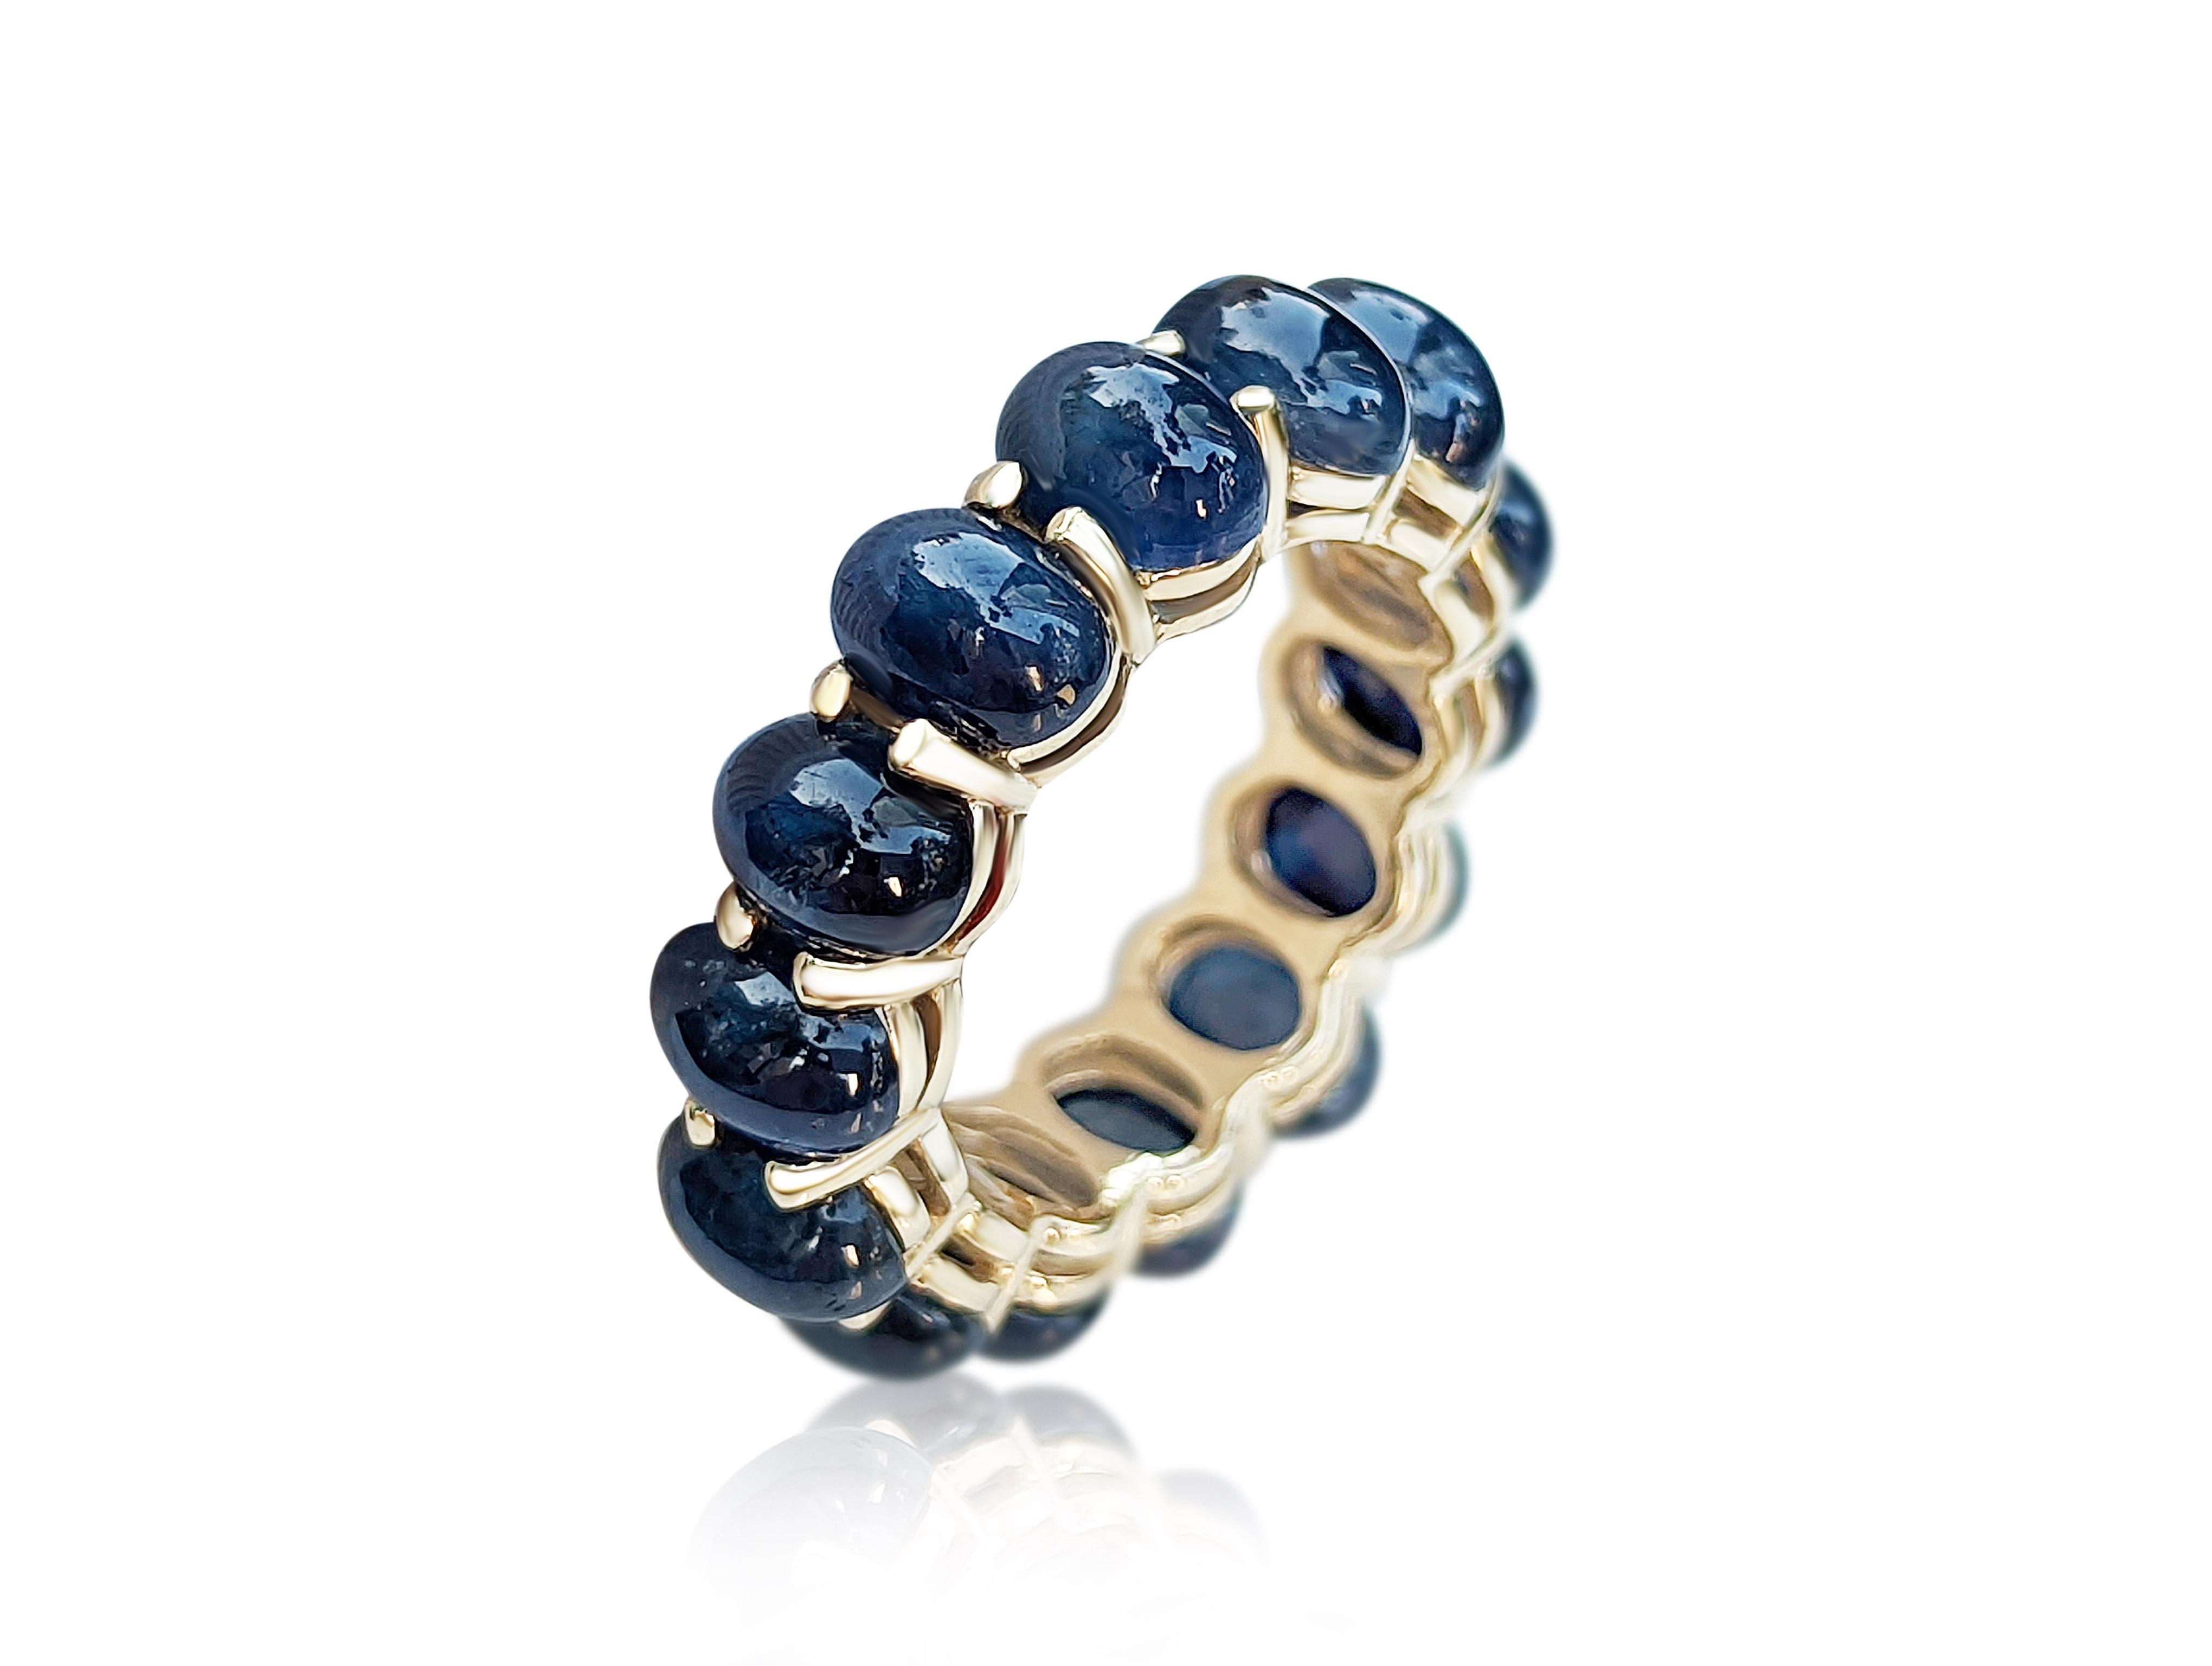 Women's 19.11 Carat Magnificent Blue Sapphire Eternity Band, 14Kt Yellow Gold, Ring